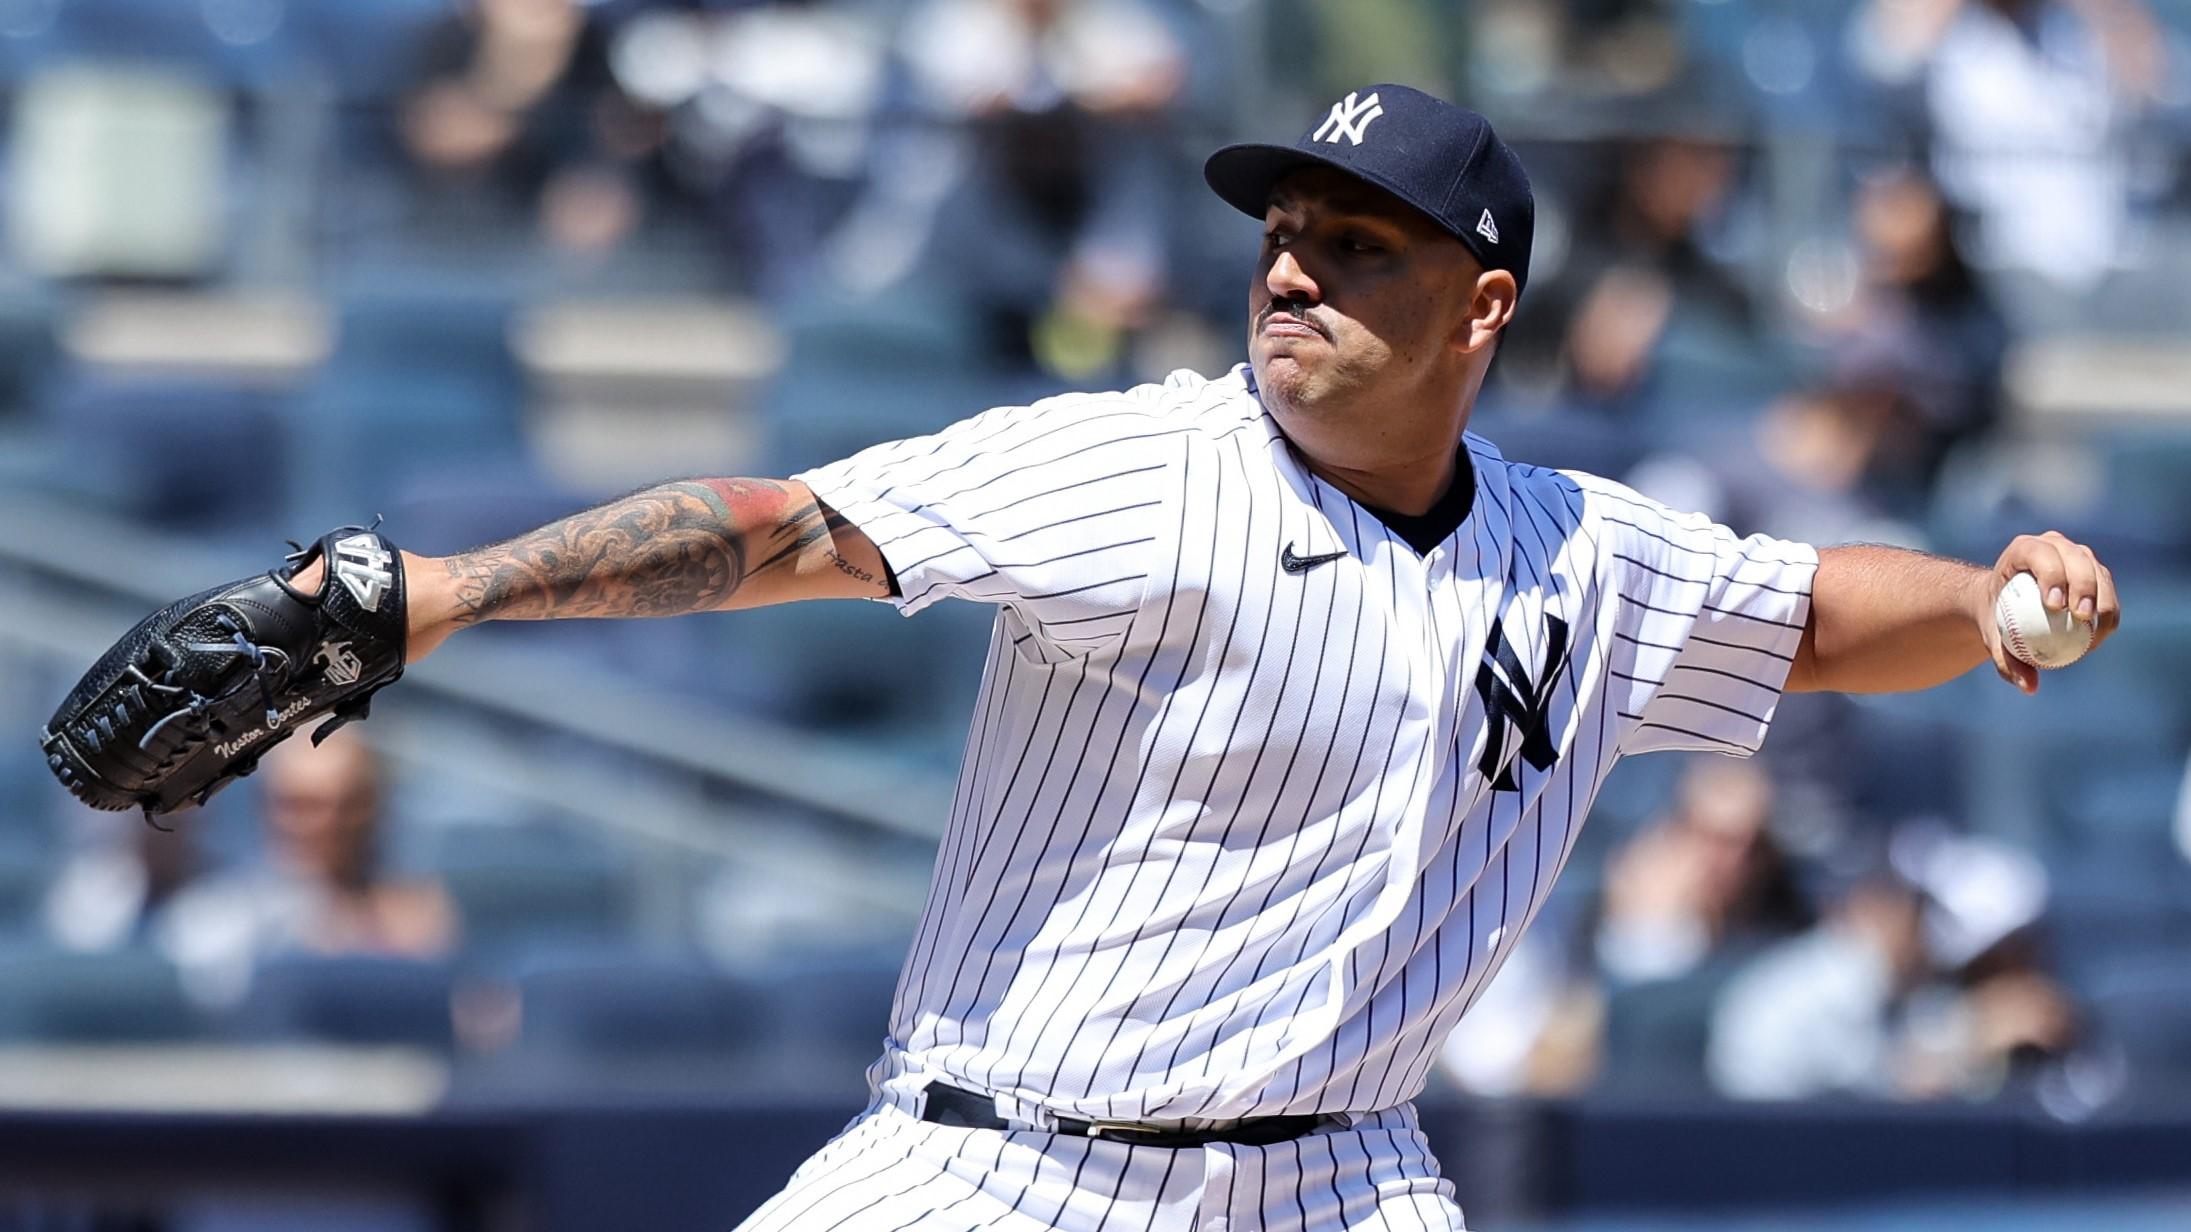 May 9, 2022; Bronx, New York, USA; New York Yankees starting pitcher Nestor Cortes throws a pitch against the Texas Rangers during the second inning at Yankee Stadium. / Jessica Alcheh-USA TODAY Sports